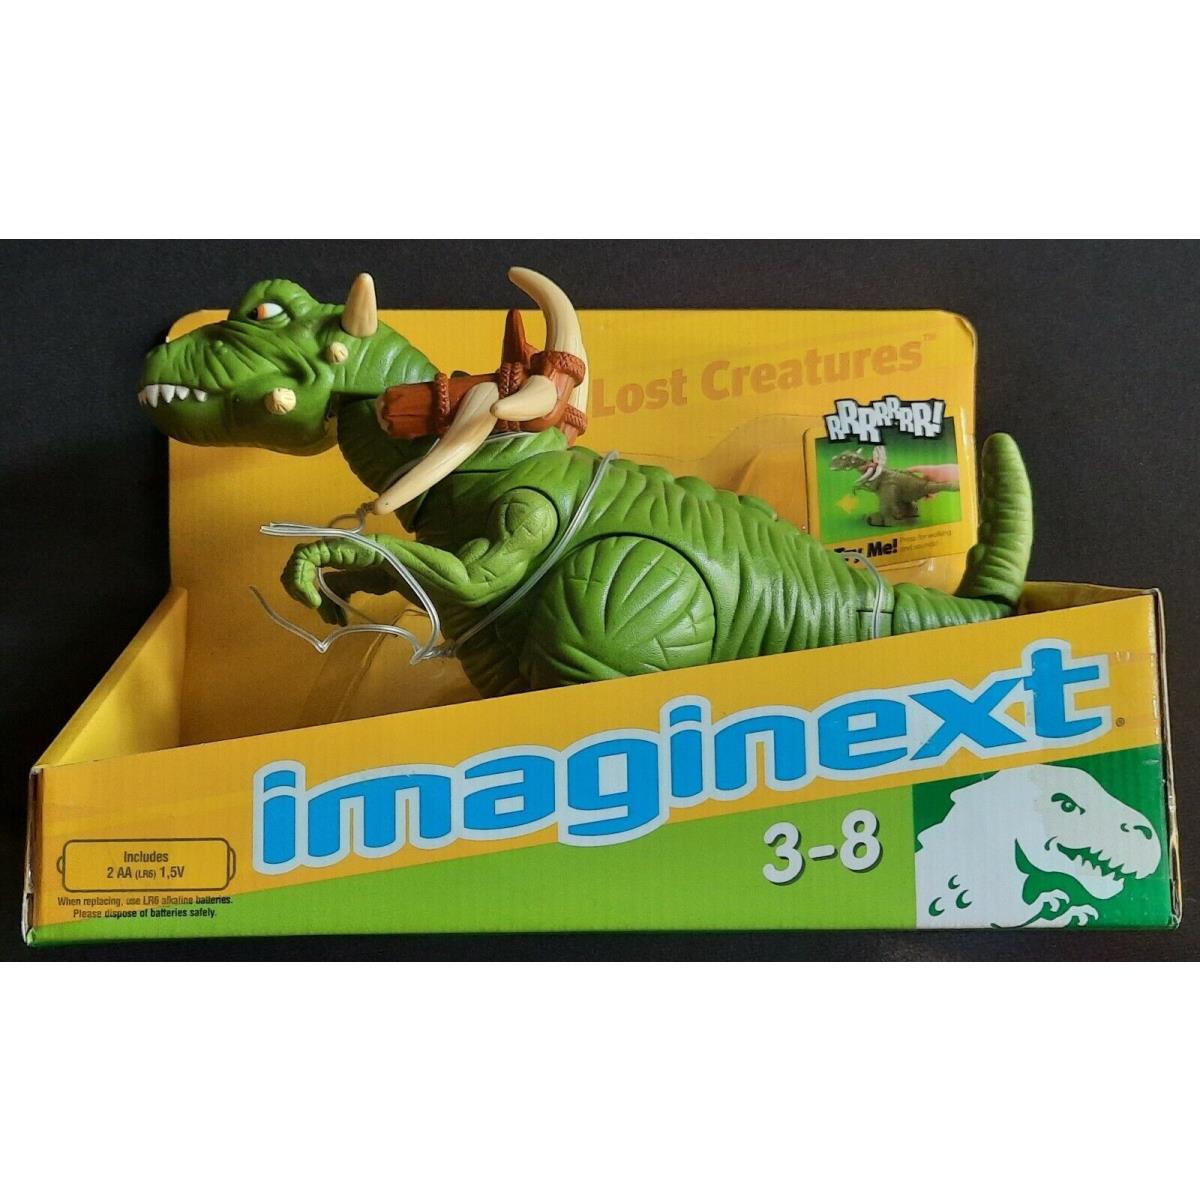 Lost Creatures Imaginext Toy By Fisher Price From 2008 - Vintage